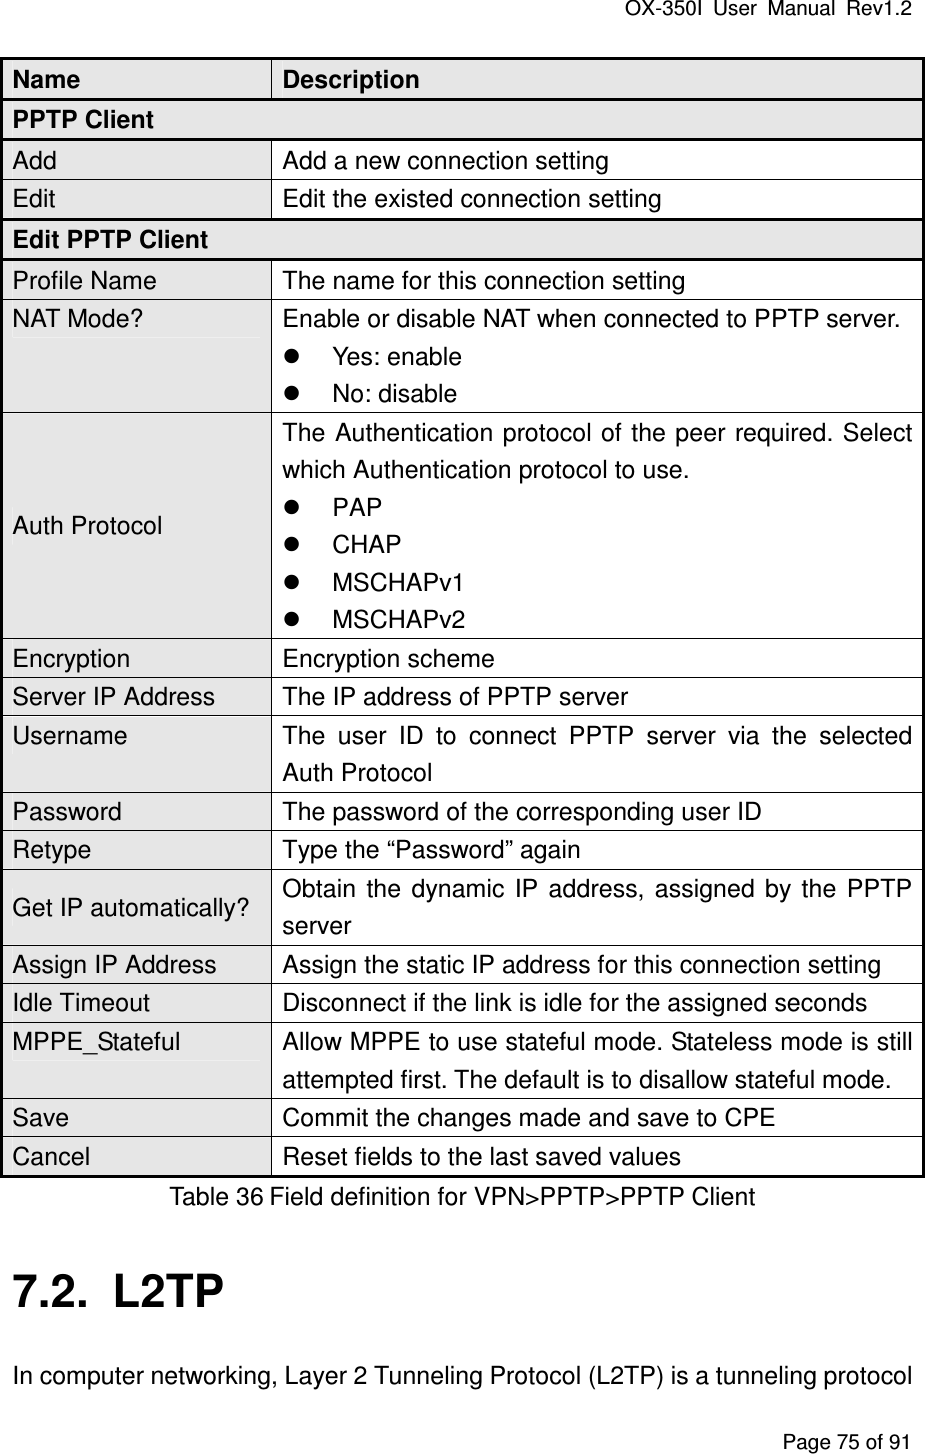 OX-350I  User  Manual  Rev1.2 Page 75 of 91 Name  Description PPTP Client Add  Add a new connection setting Edit  Edit the existed connection setting Edit PPTP Client Profile Name  The name for this connection setting NAT Mode?  Enable or disable NAT when connected to PPTP server.   Yes: enable   No: disable Auth Protocol The Authentication protocol of  the peer  required. Select which Authentication protocol to use.   PAP   CHAP   MSCHAPv1   MSCHAPv2 Encryption  Encryption scheme Server IP Address  The IP address of PPTP server Username  The  user  ID  to  connect  PPTP  server  via  the  selected Auth Protocol Password  The password of the corresponding user ID Retype  Type the “Password” again Get IP automatically?  Obtain  the  dynamic  IP  address,  assigned  by  the  PPTP server Assign IP Address  Assign the static IP address for this connection setting Idle Timeout  Disconnect if the link is idle for the assigned seconds MPPE_Stateful  Allow MPPE to use stateful mode. Stateless mode is still attempted first. The default is to disallow stateful mode. Save  Commit the changes made and save to CPE Cancel  Reset fields to the last saved values Table 36 Field definition for VPN&gt;PPTP&gt;PPTP Client 7.2.  L2TP In computer networking, Layer 2 Tunneling Protocol (L2TP) is a tunneling protocol 